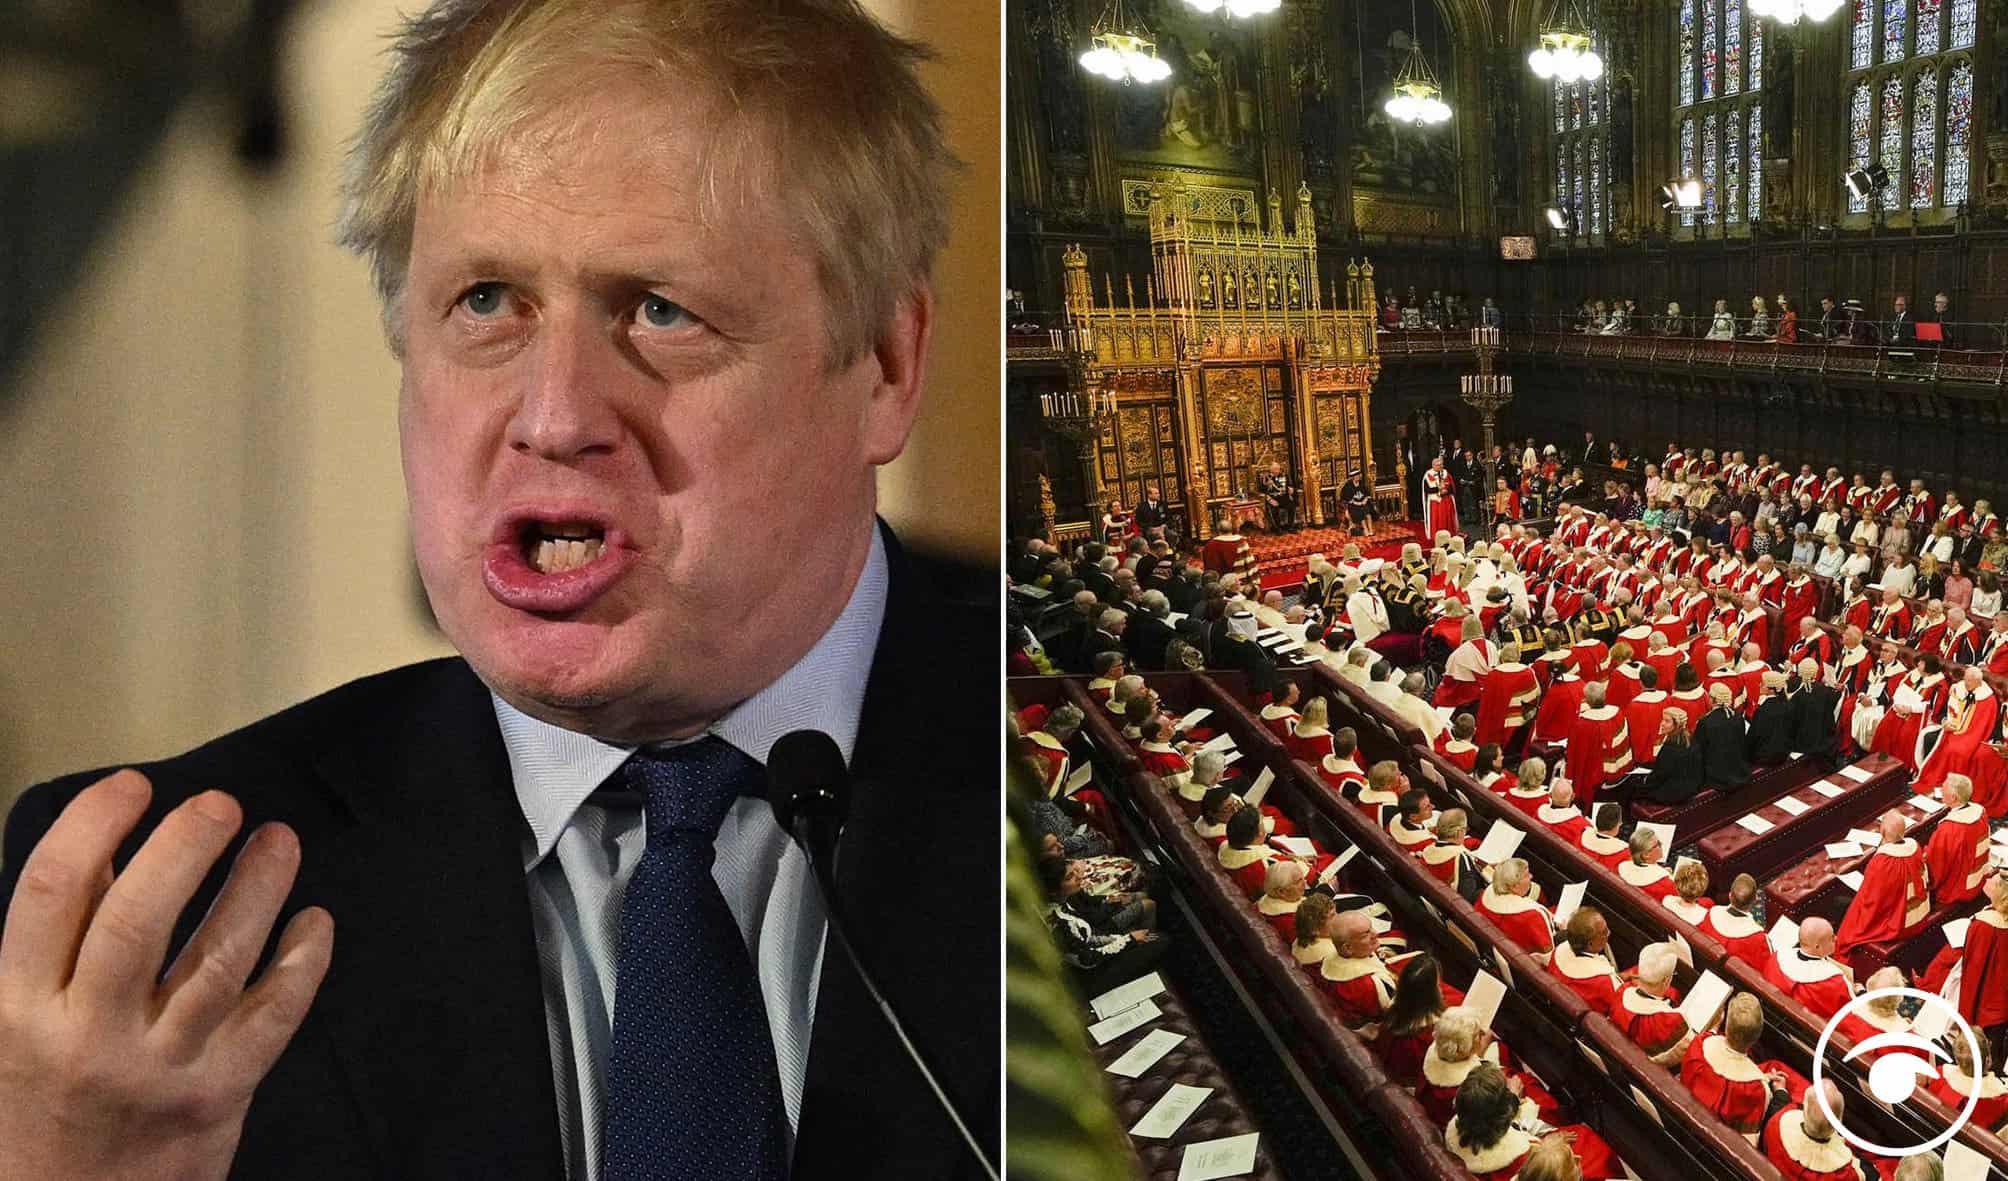 Anger at secret plan to fill Lords with Tory loyalists as petition launched to stop it